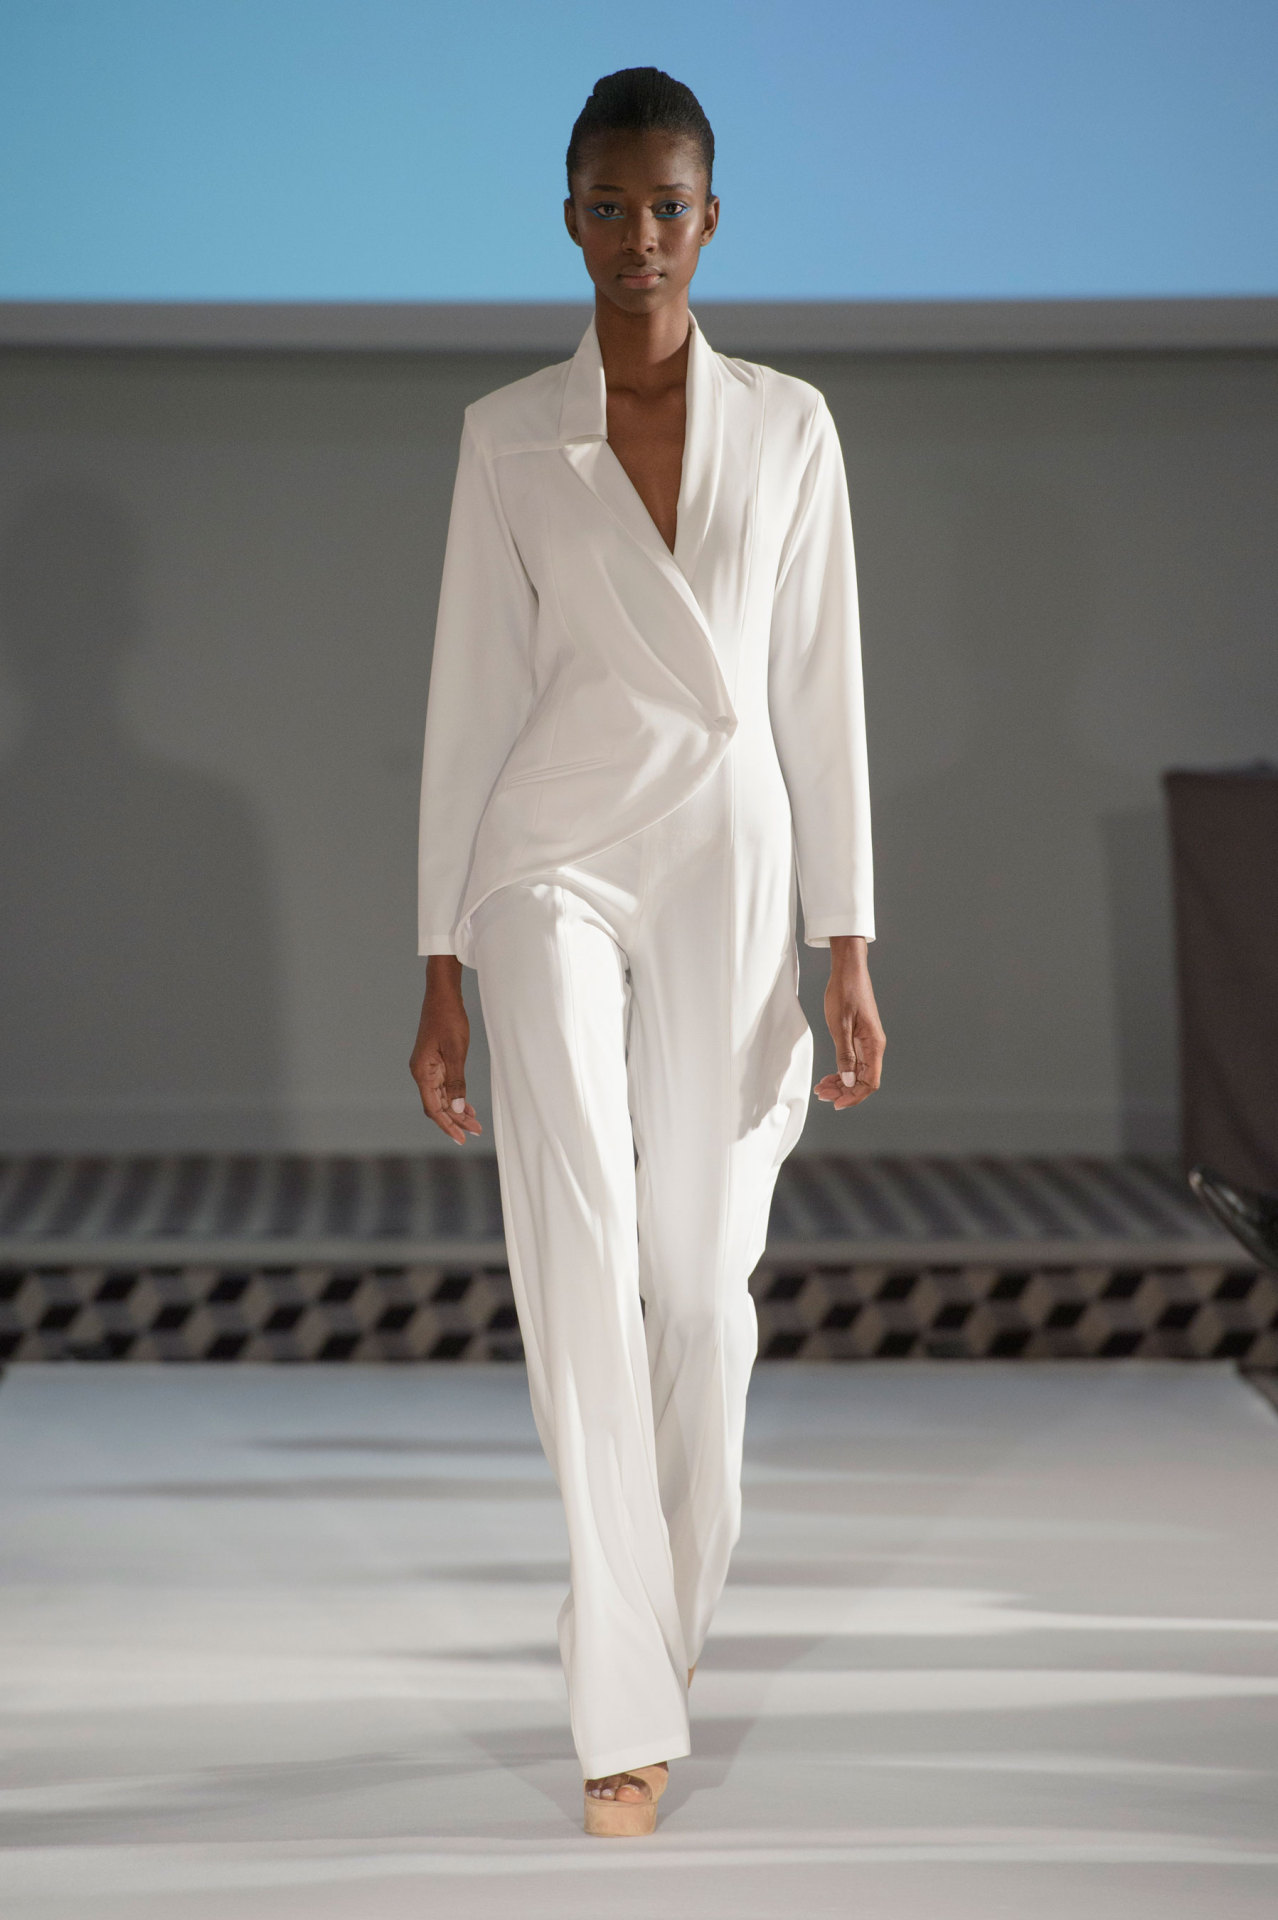 On the Catwalk with Fatima Lopes